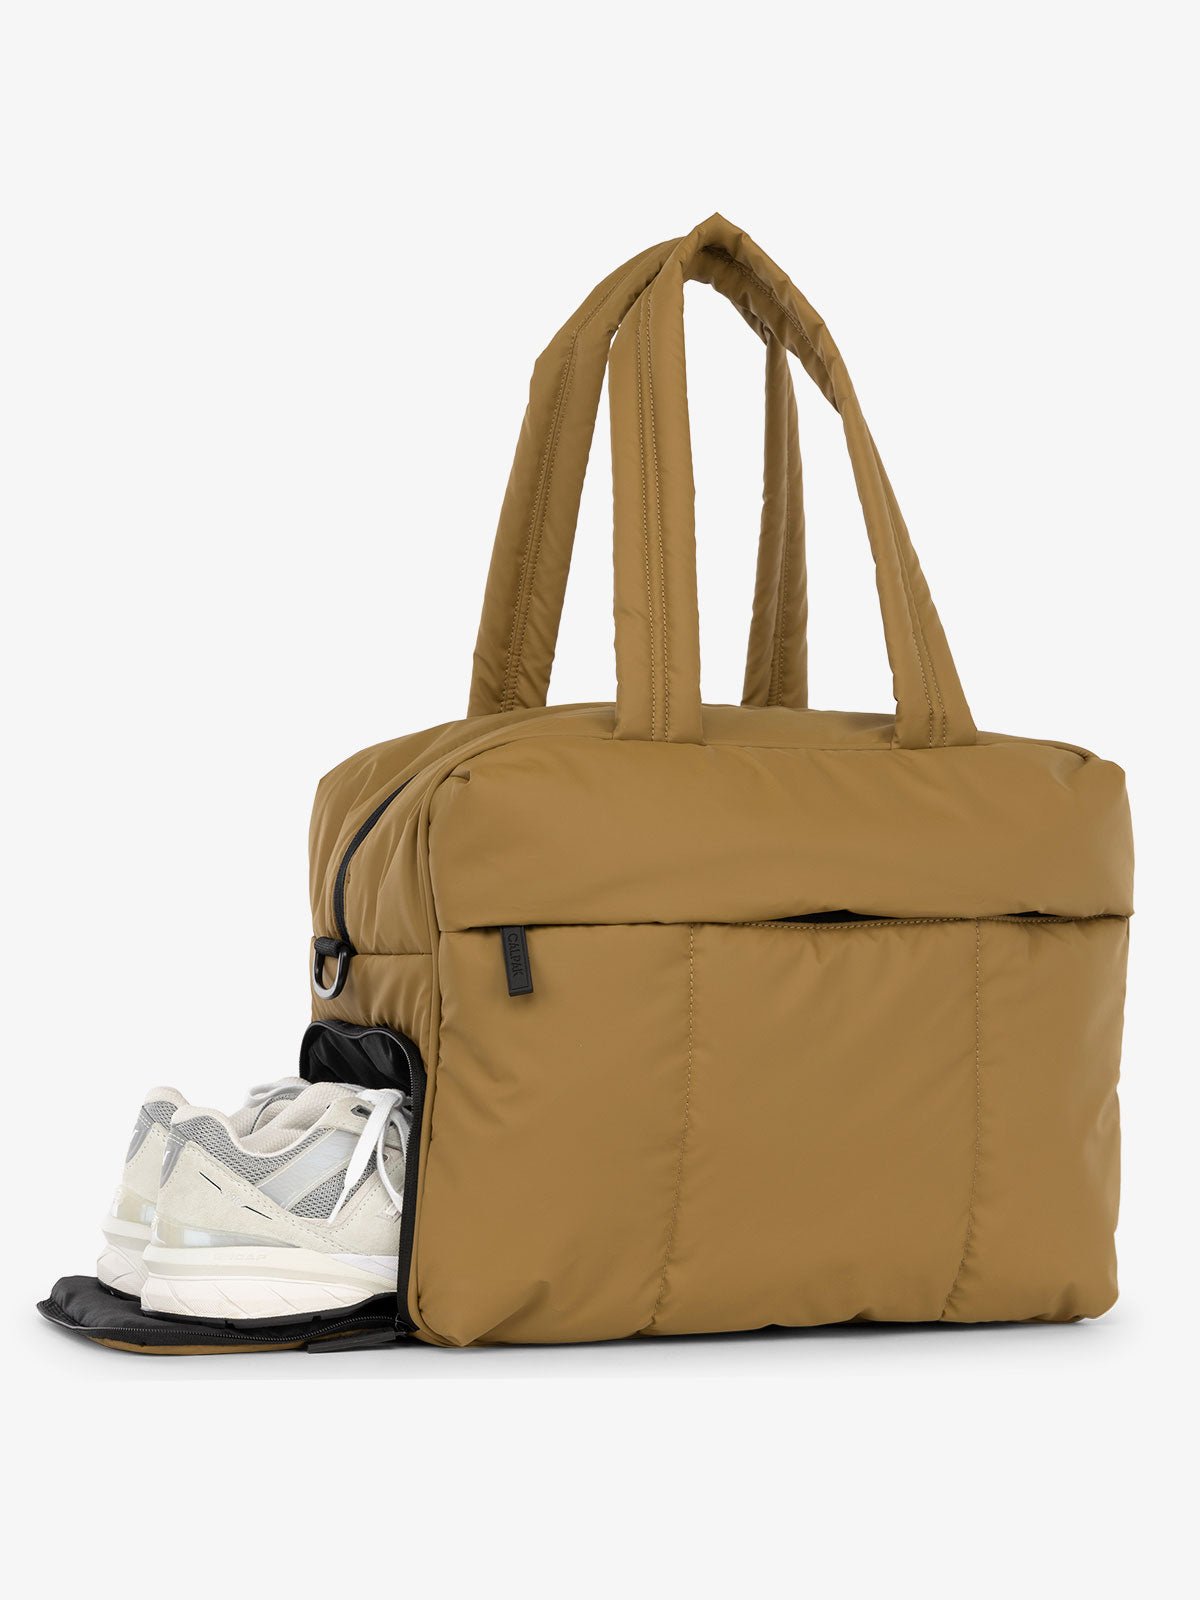 CALPAK Luka Duffel Bag with side shoe compartment and top handles in khaki brown